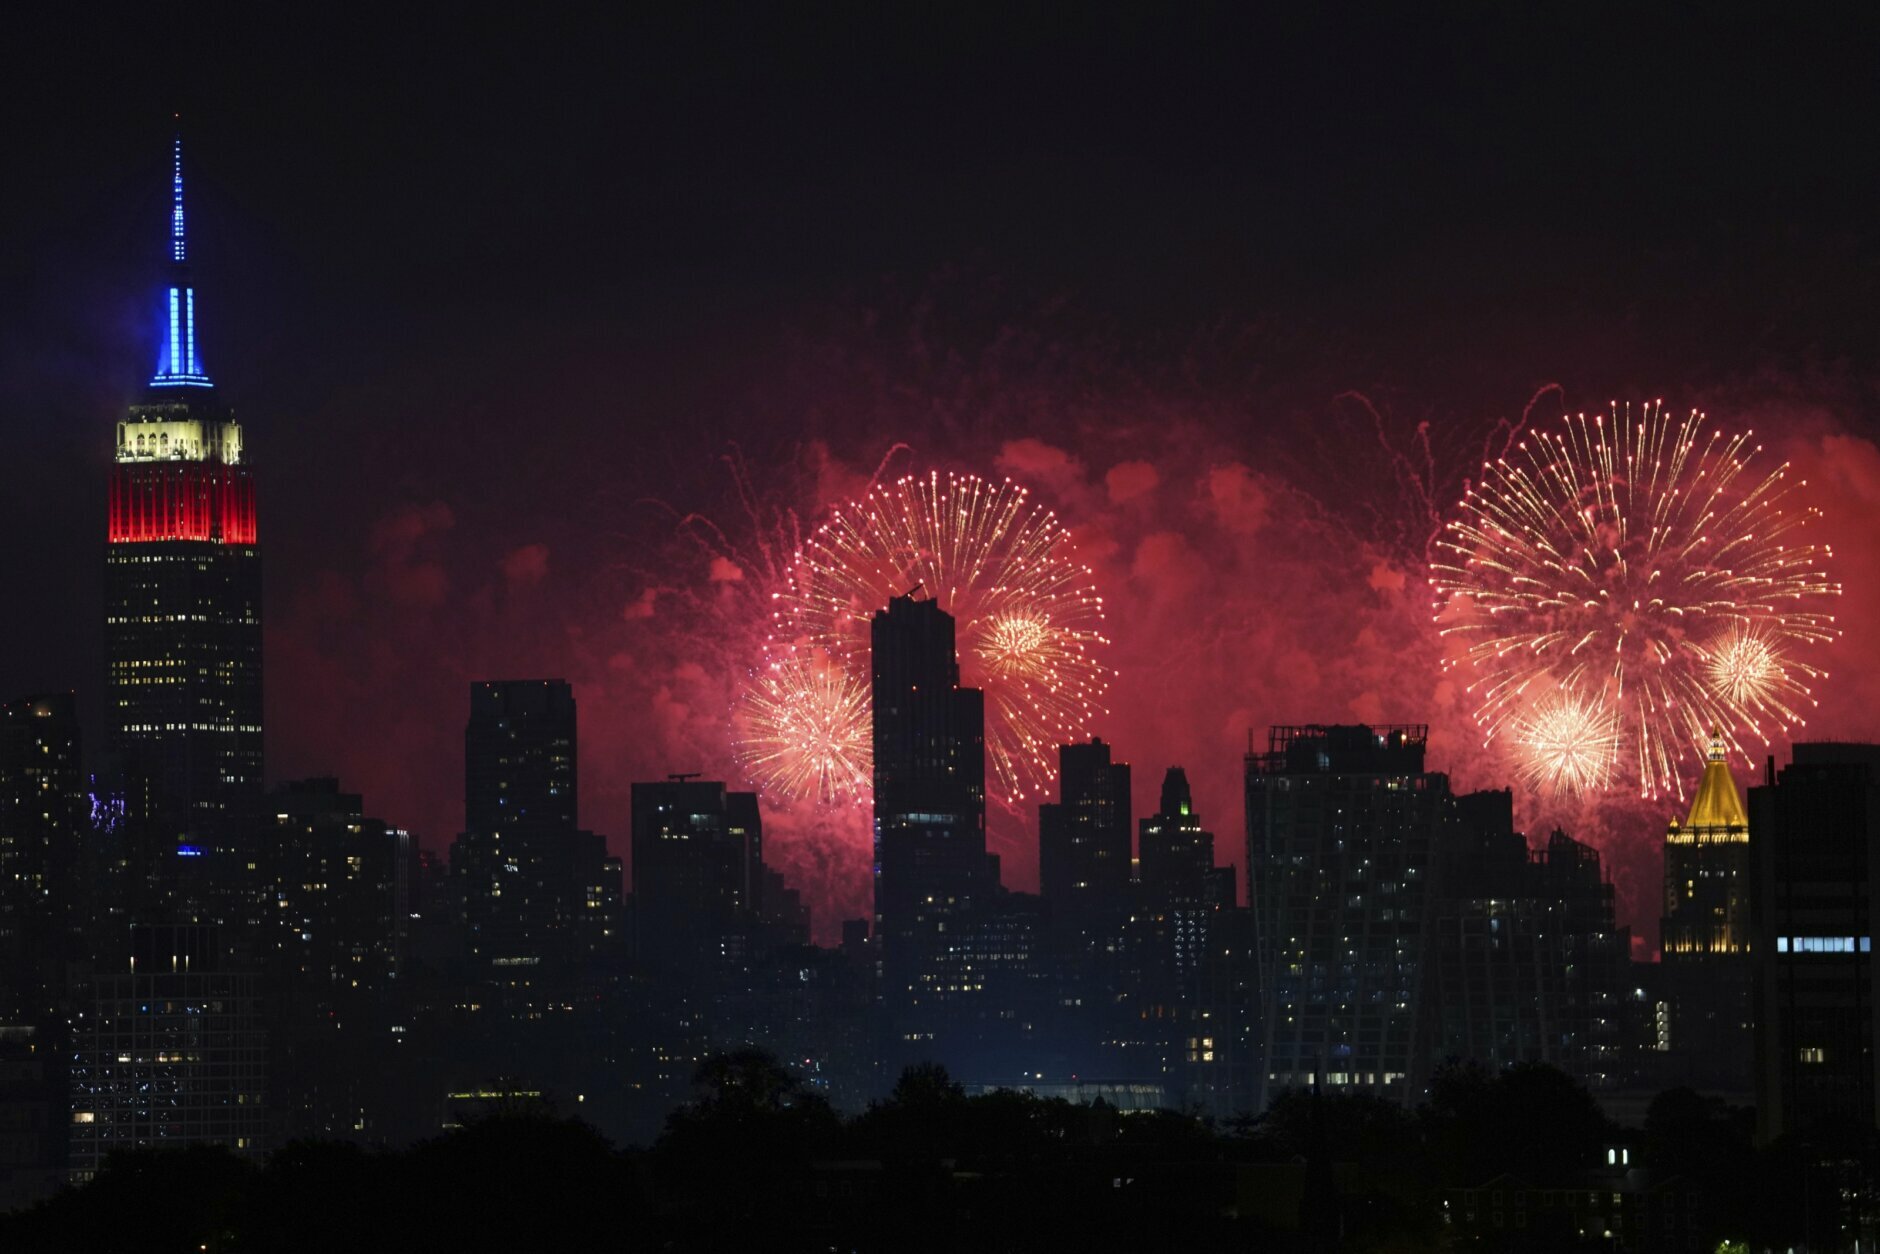 Fireworks explode over the New York City skyline during Macy's 4th of July fireworks display, late Sunday, July 4, 2021, as seen from Jersey City, N.J. (AP Photo/Charles Sykes)